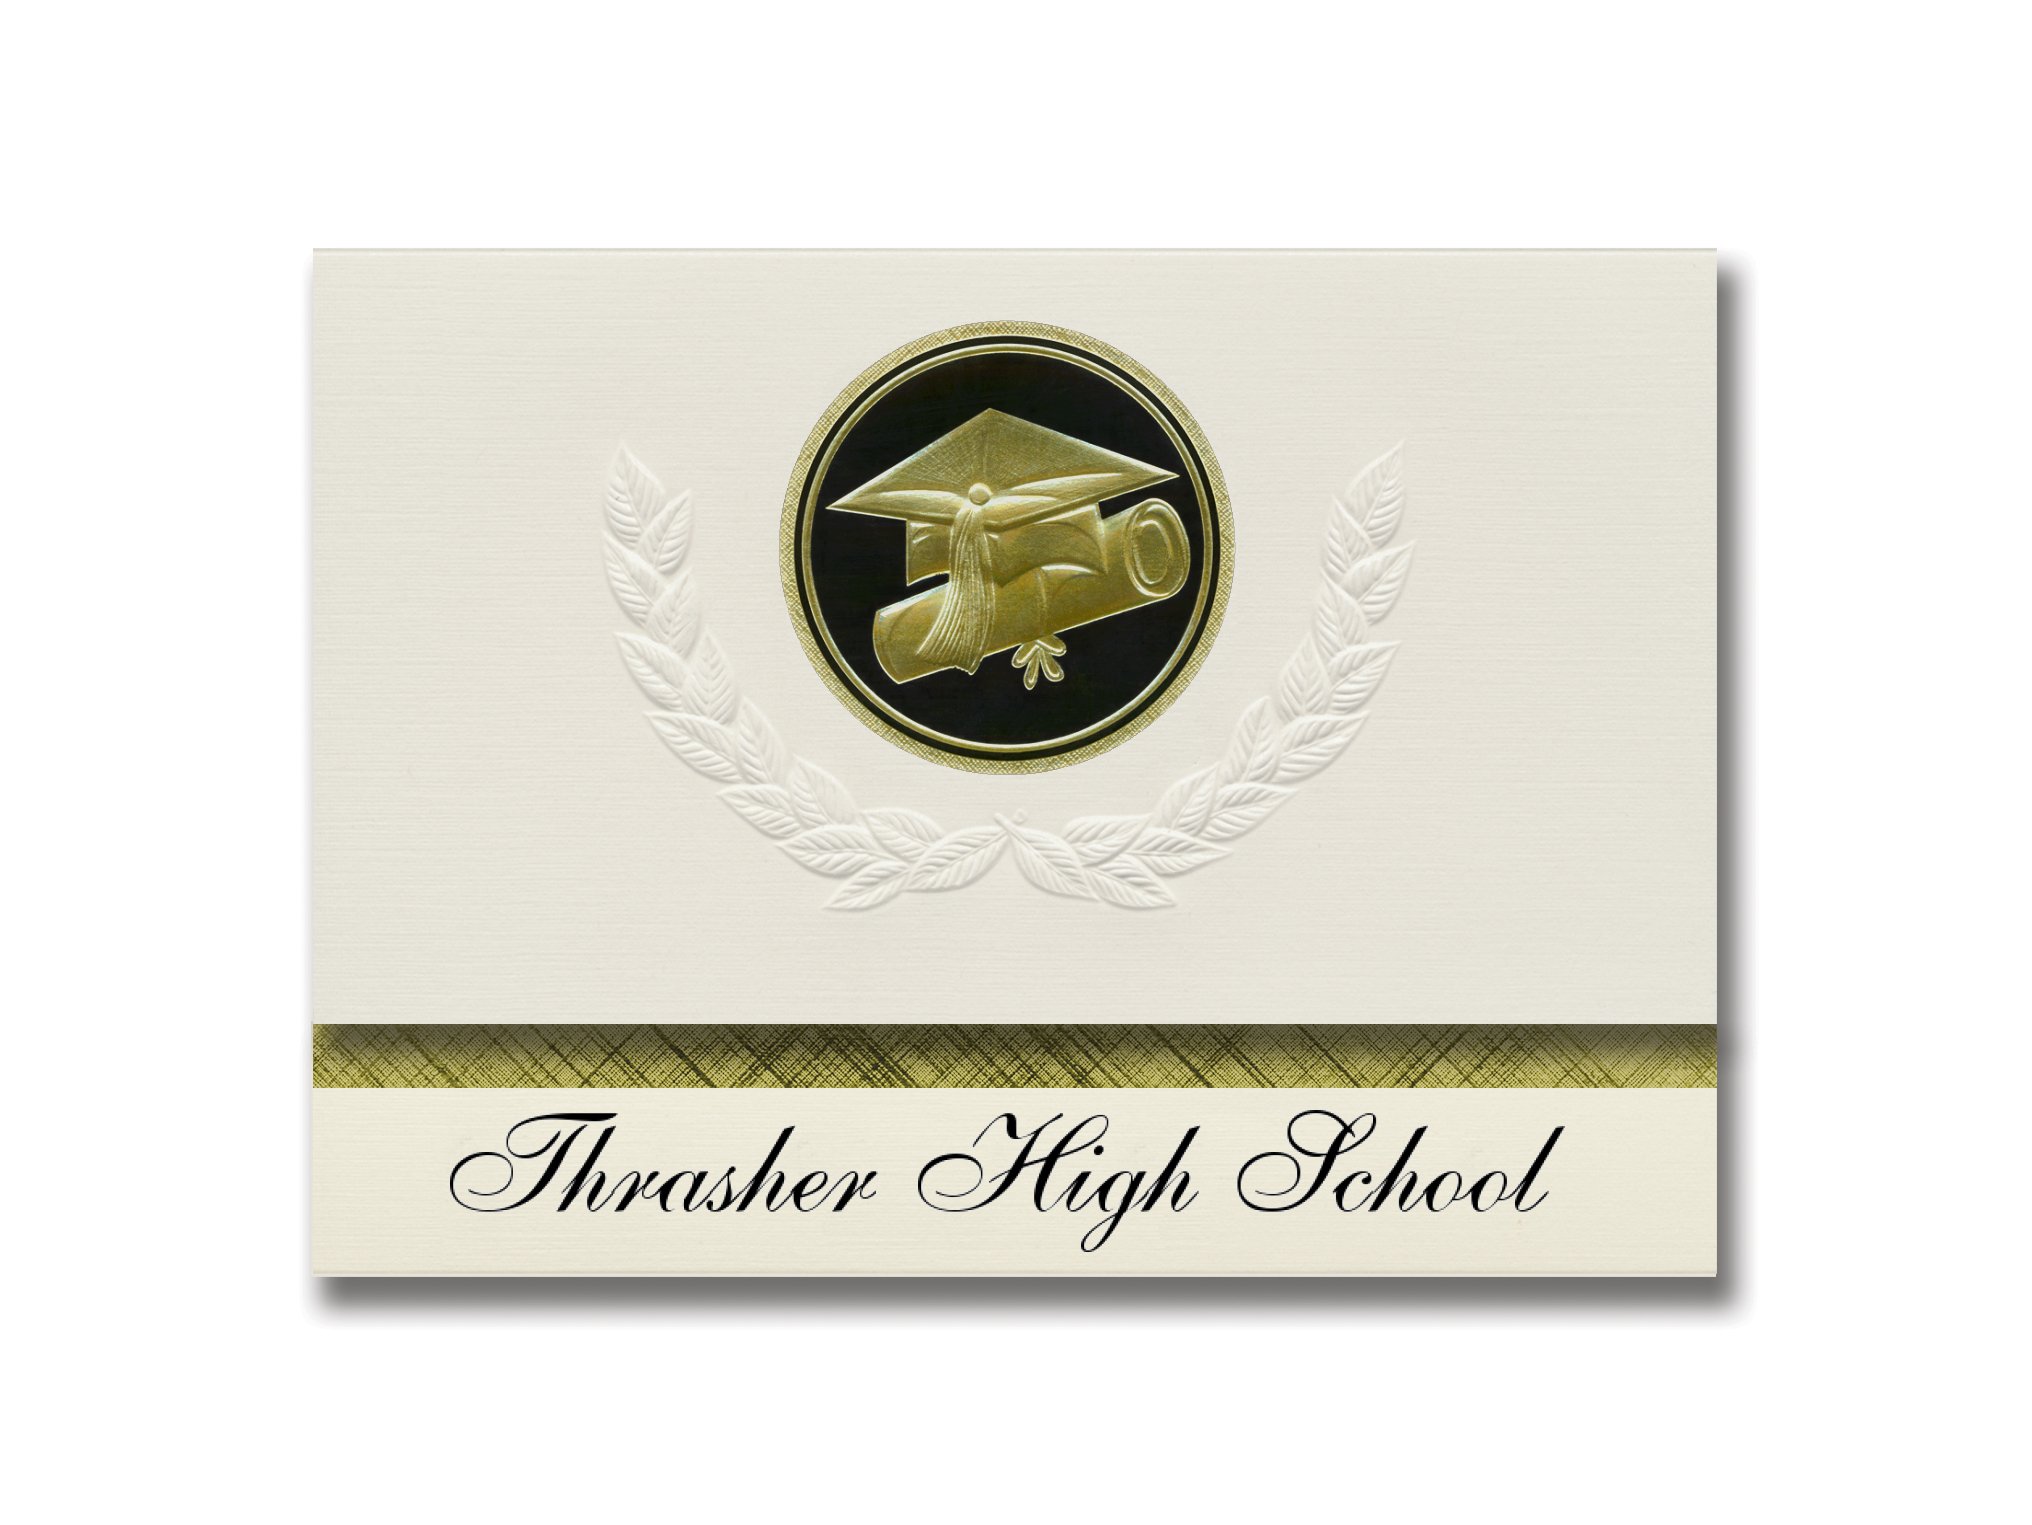 Signature Announcements Thrasher High School (Booneville, MS) Graduation Announcements, Presidential style, Basic package of 25 Cap & Diploma Seal....